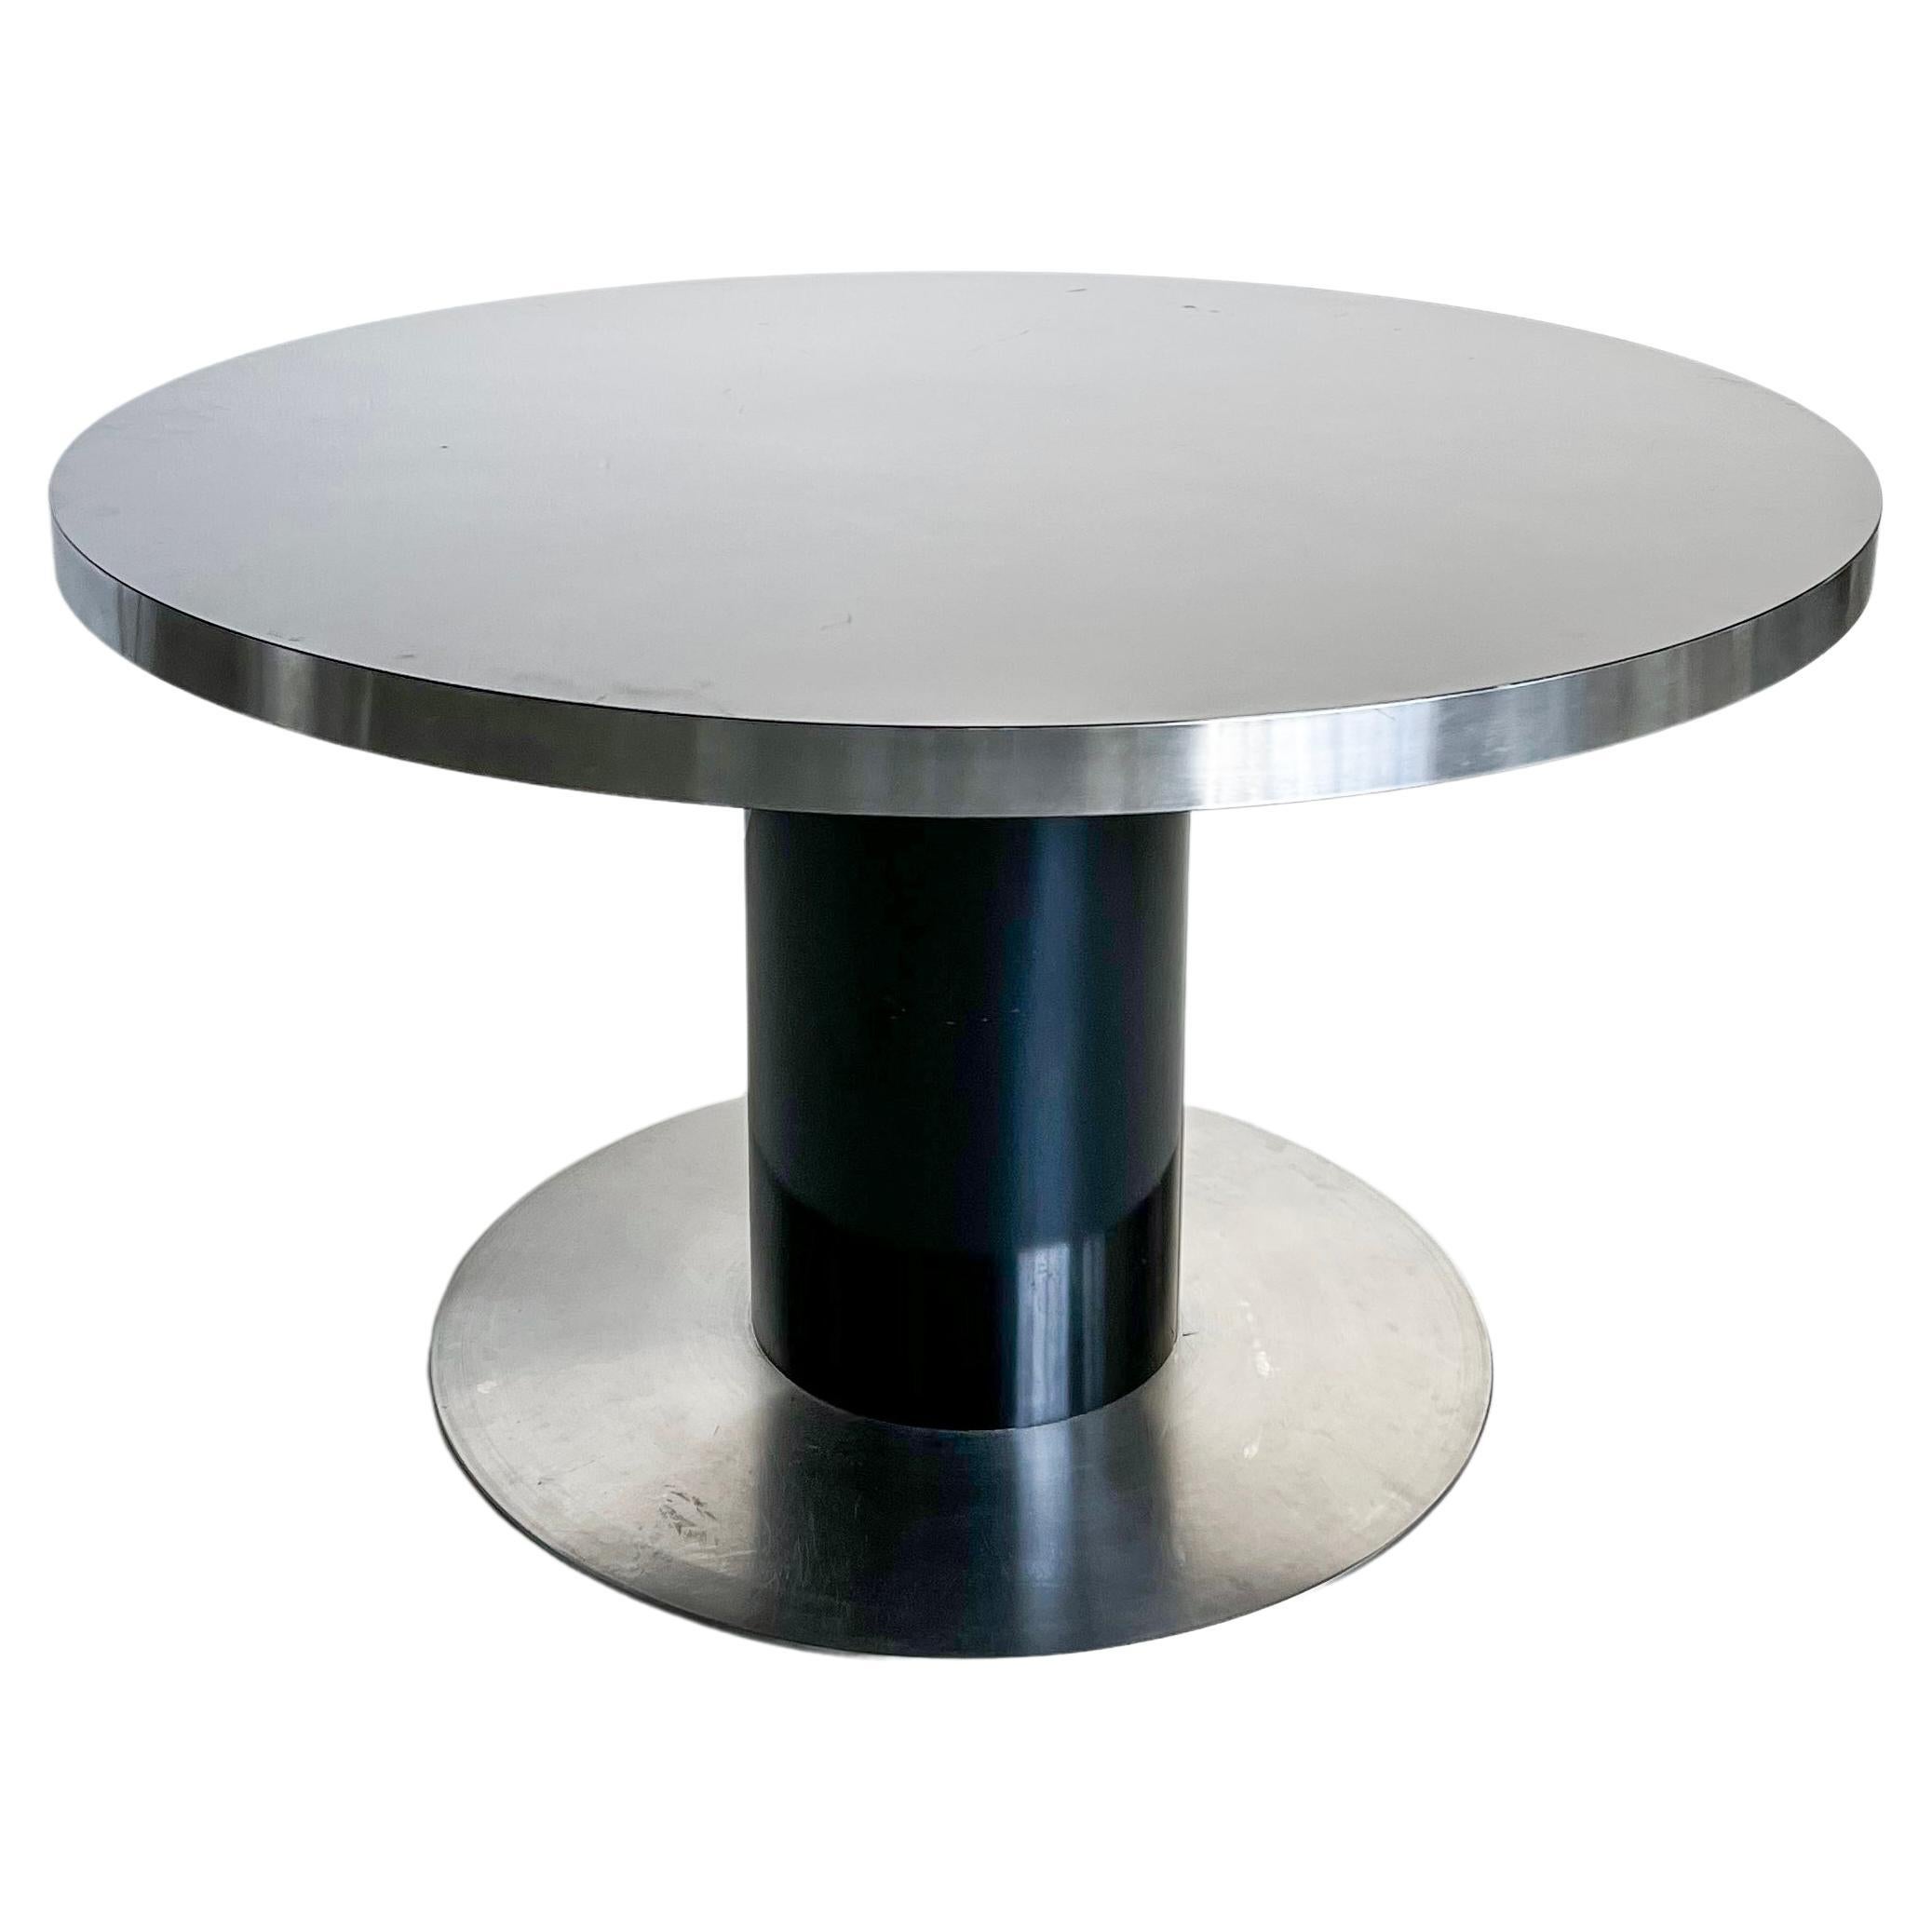 Vintage Italian Space Age Dining Table in Lacquered Wood & Steel by Willy Rizzo For Sale